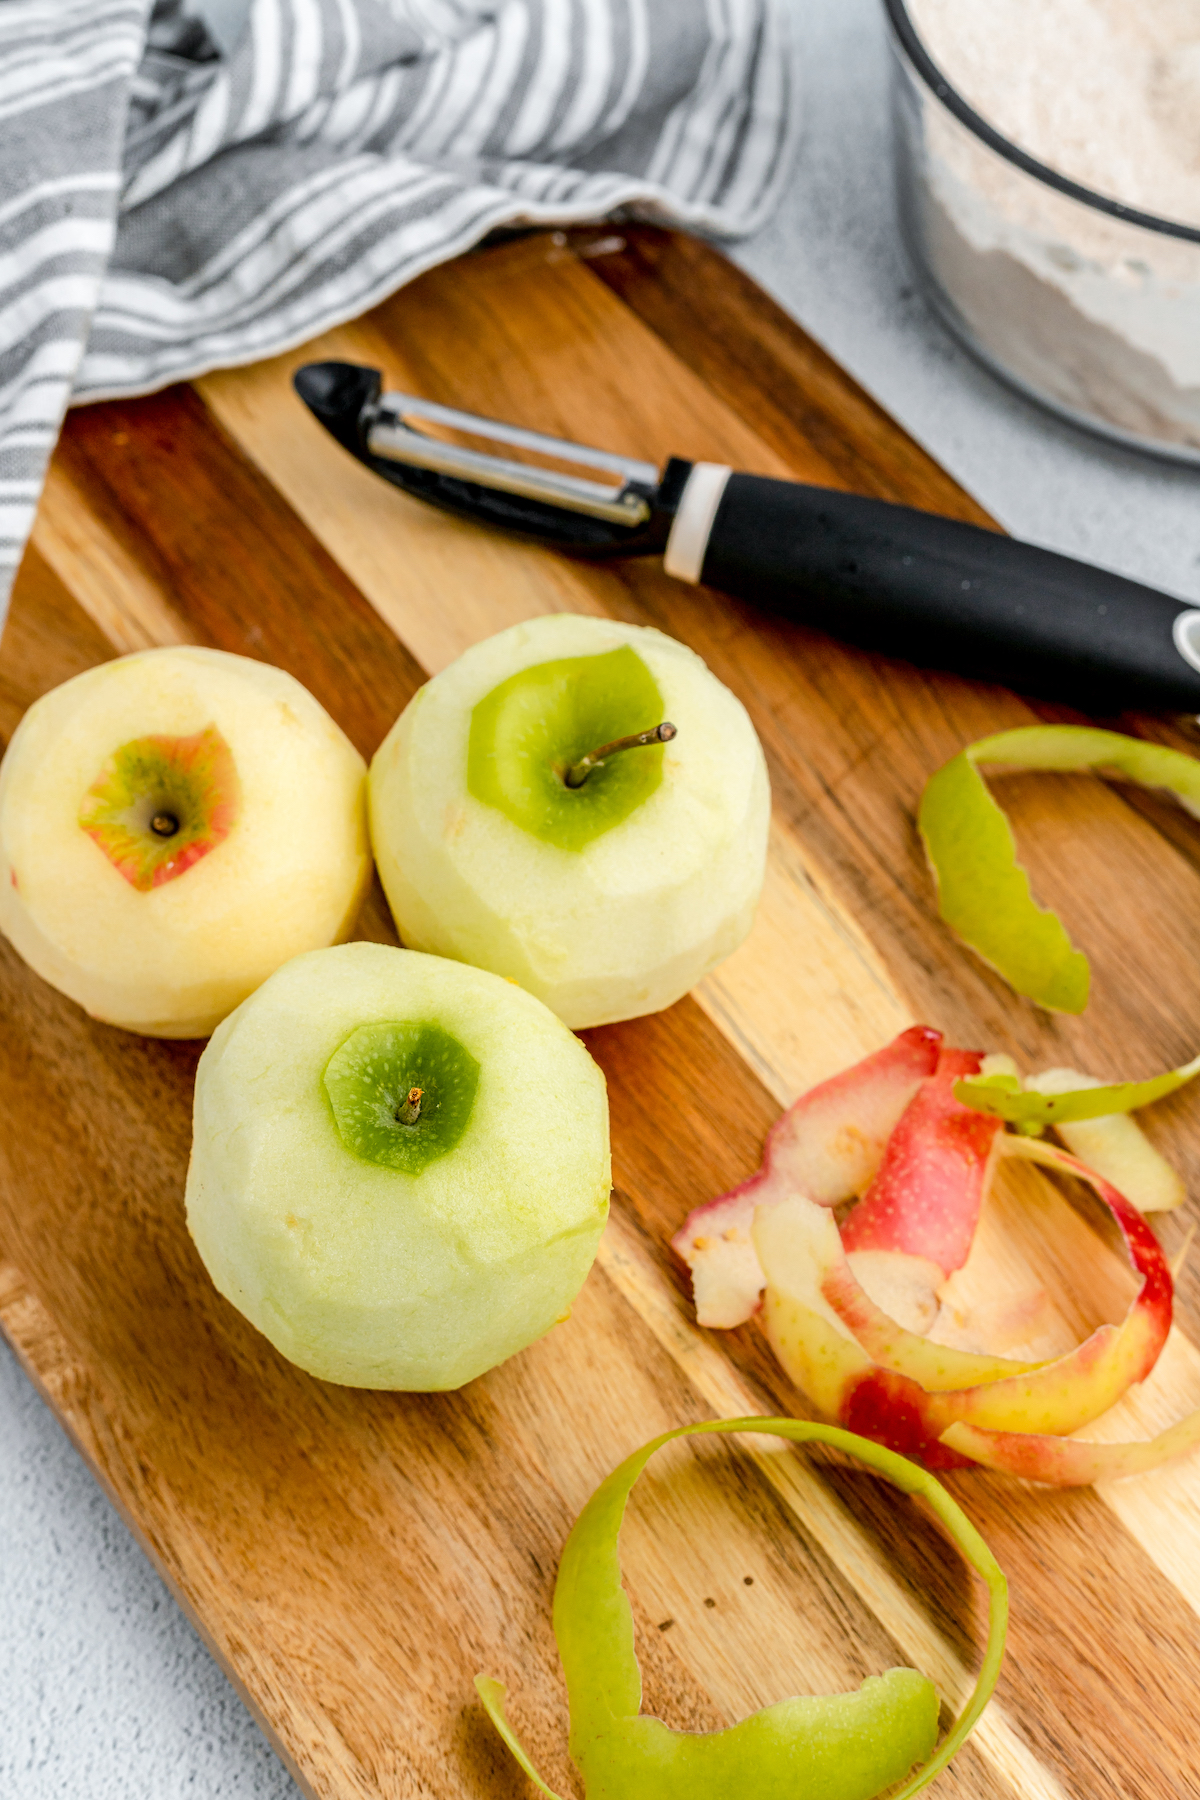 Three peeled apples on a wooden cutting board, next to apple skins and a peeler.